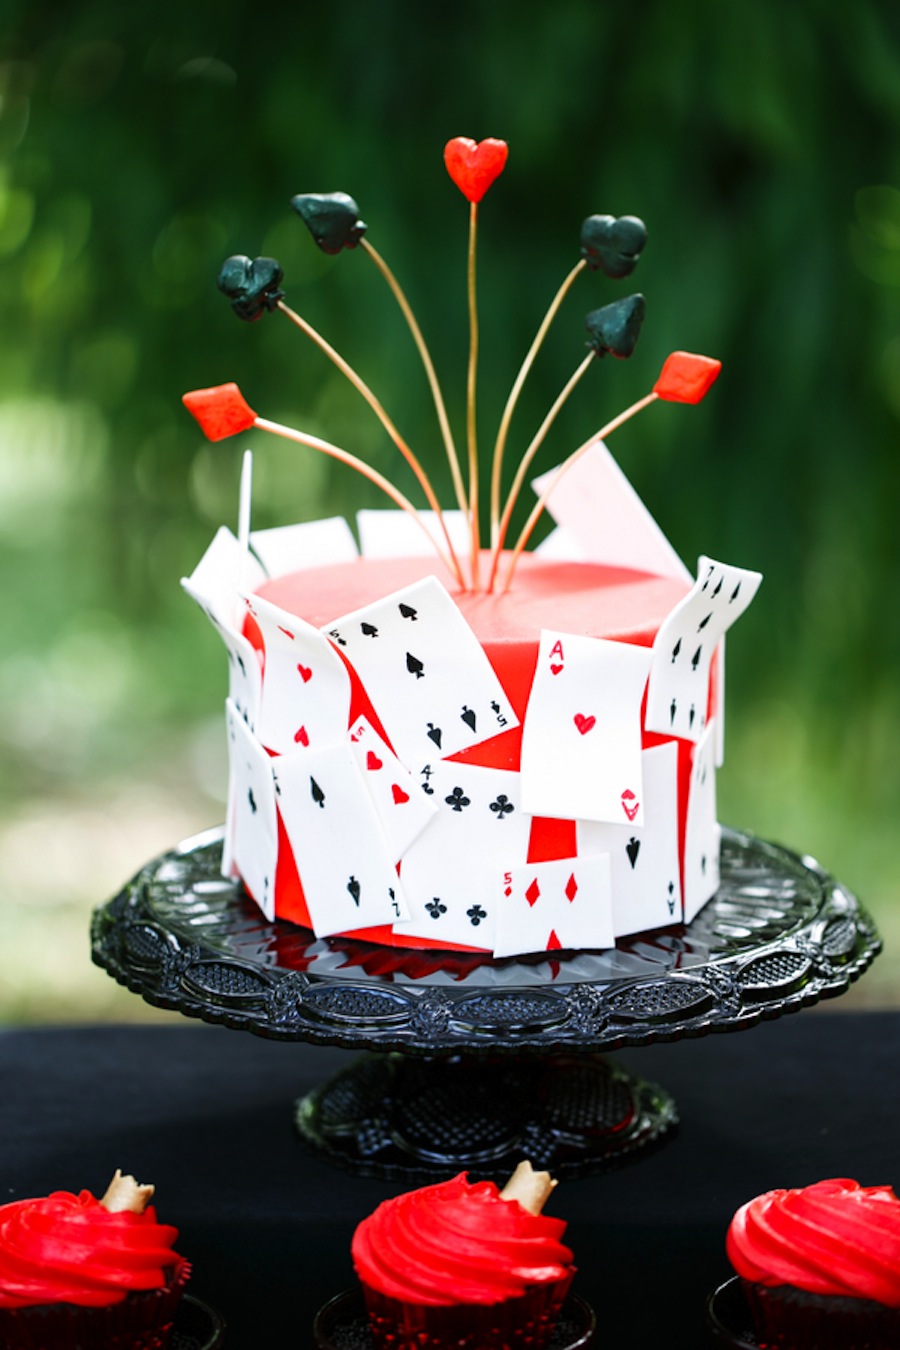 Alice in Wonderland Queen of Hearts Playing Cards Cake Desserts Black and Red Tea Party Wedding Bridal Shower | Tampa Wedding Venue USF Botanical Gardens | Chefin Pastries